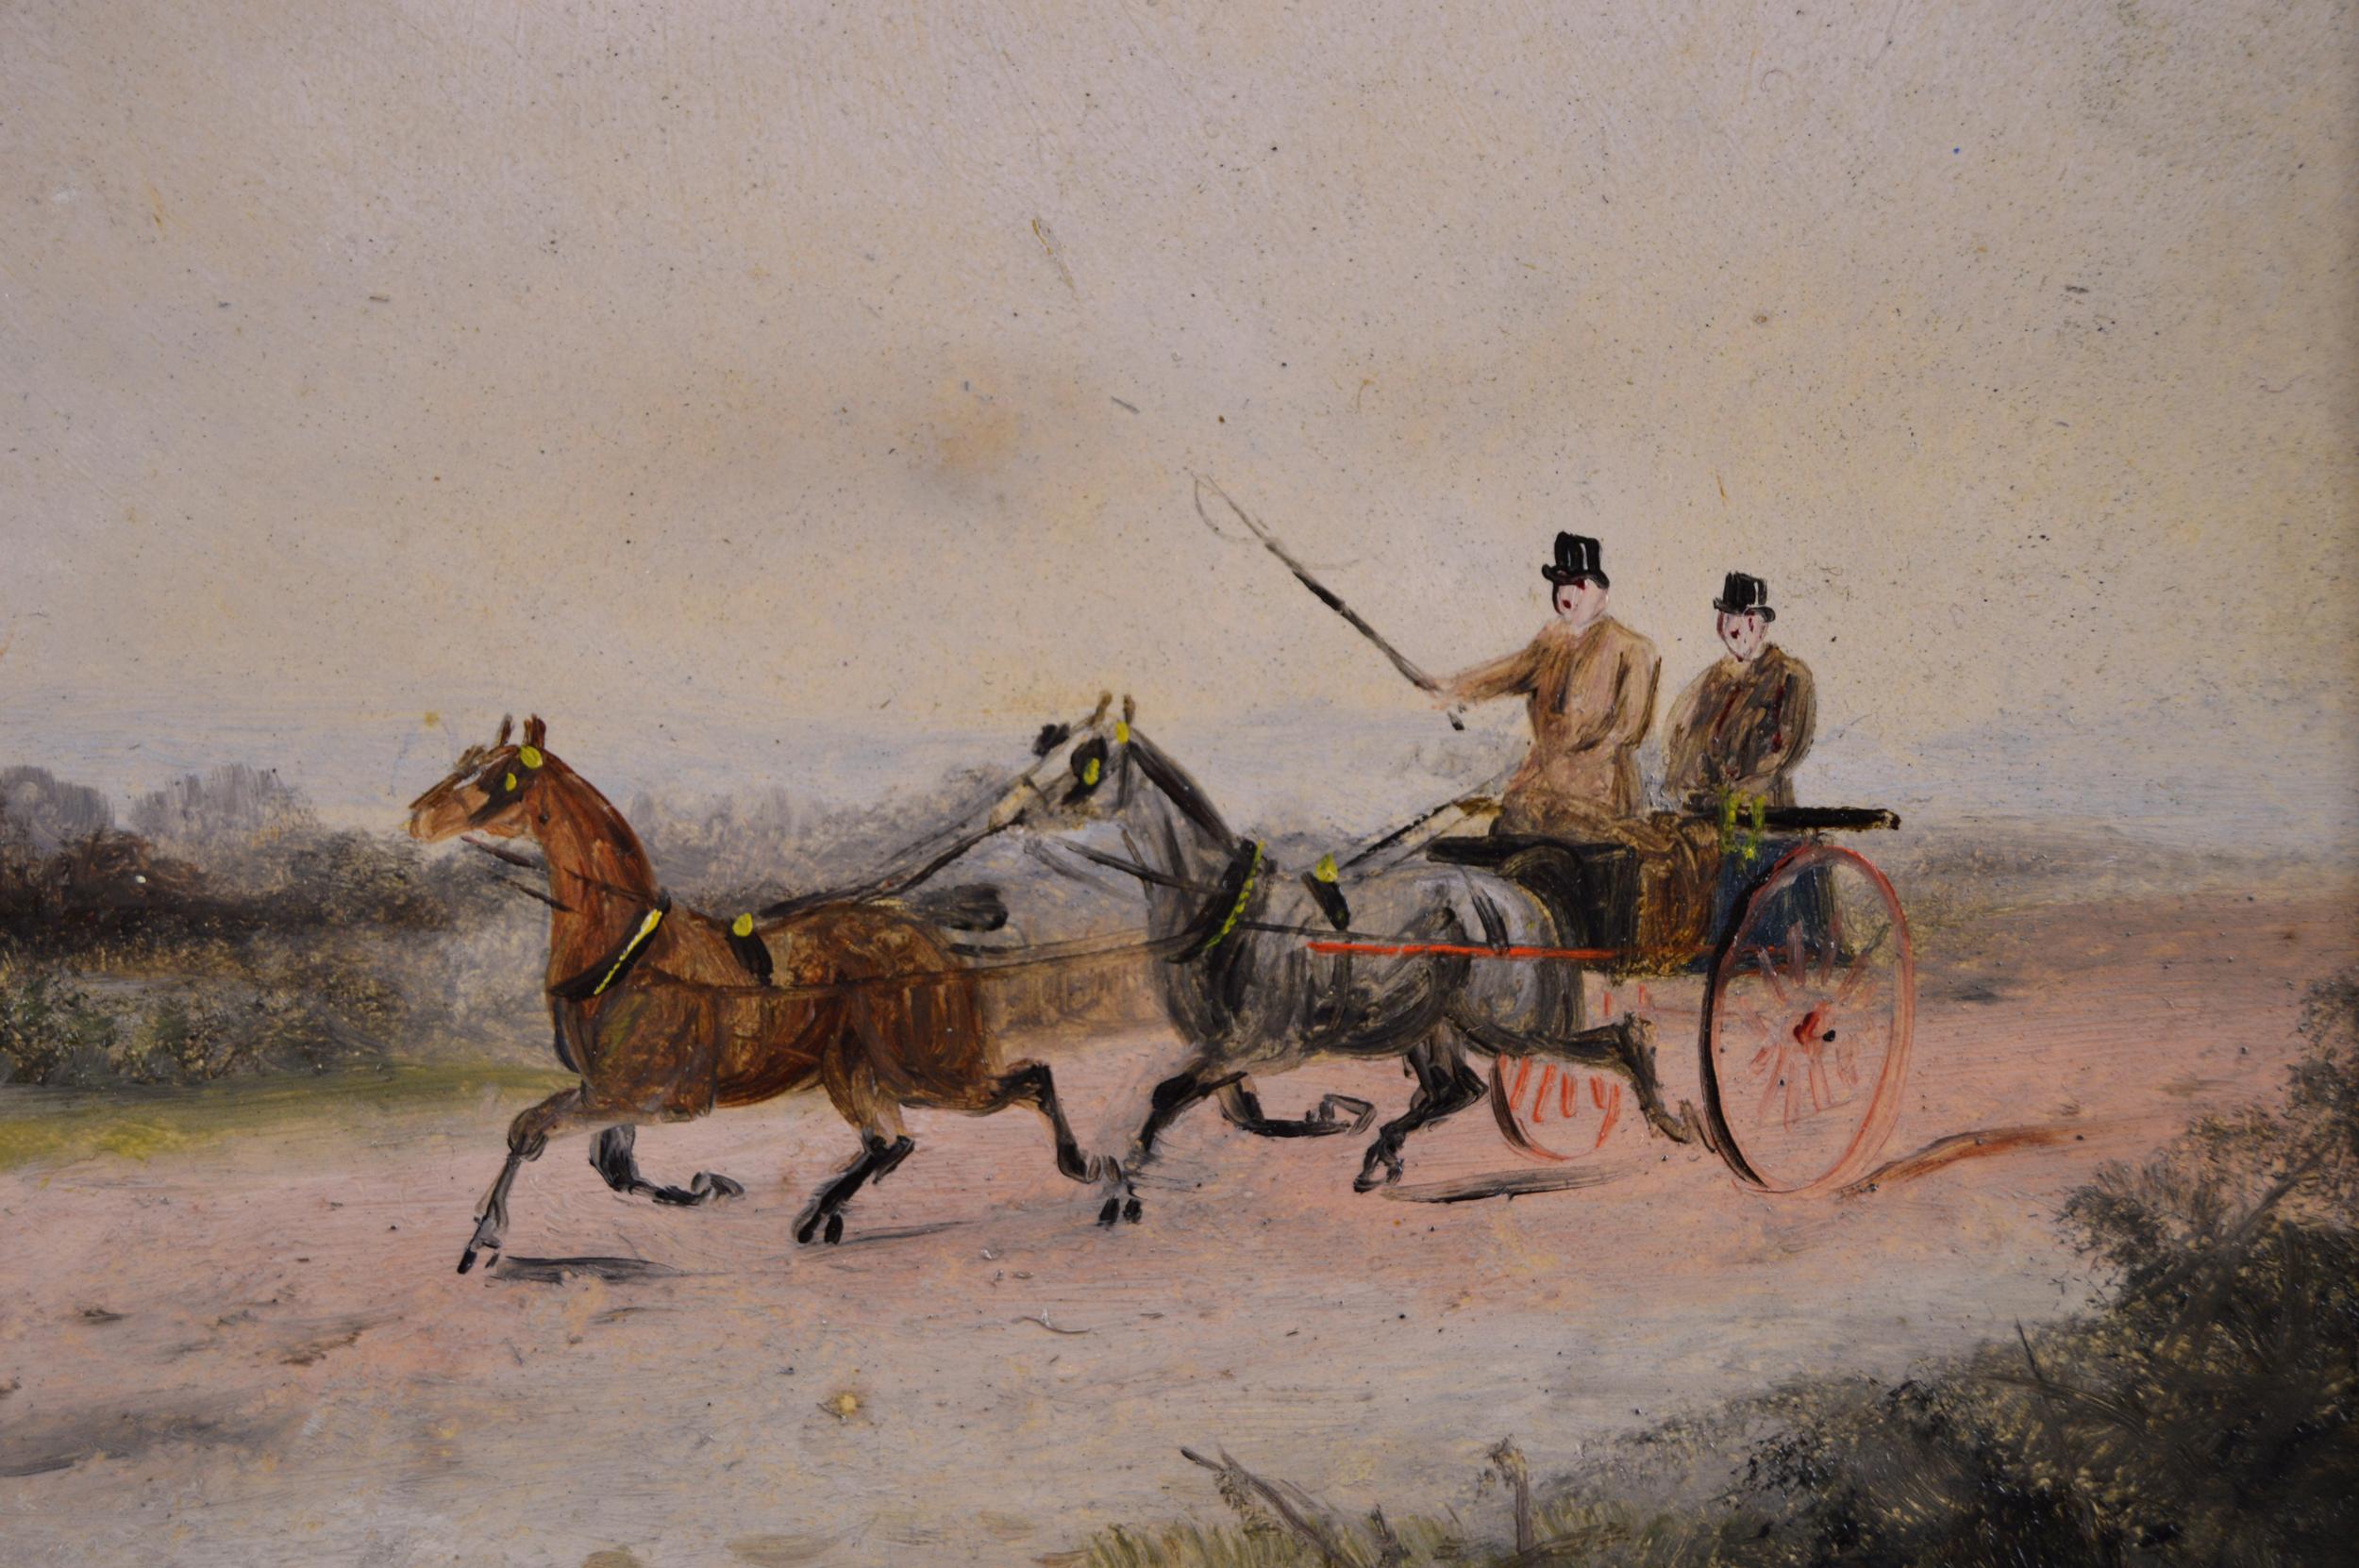 Philip H Rideout
British, (1842-1920)
Pair of Coaching Scenes
Oil on board, pair, both signed & dated 1894
Image size: 7.5 inches x 15.5 inches 
Size including frame: 12 inches x 20 inches

Philip Hicksman or Hinckesman Rideout was born in on 16